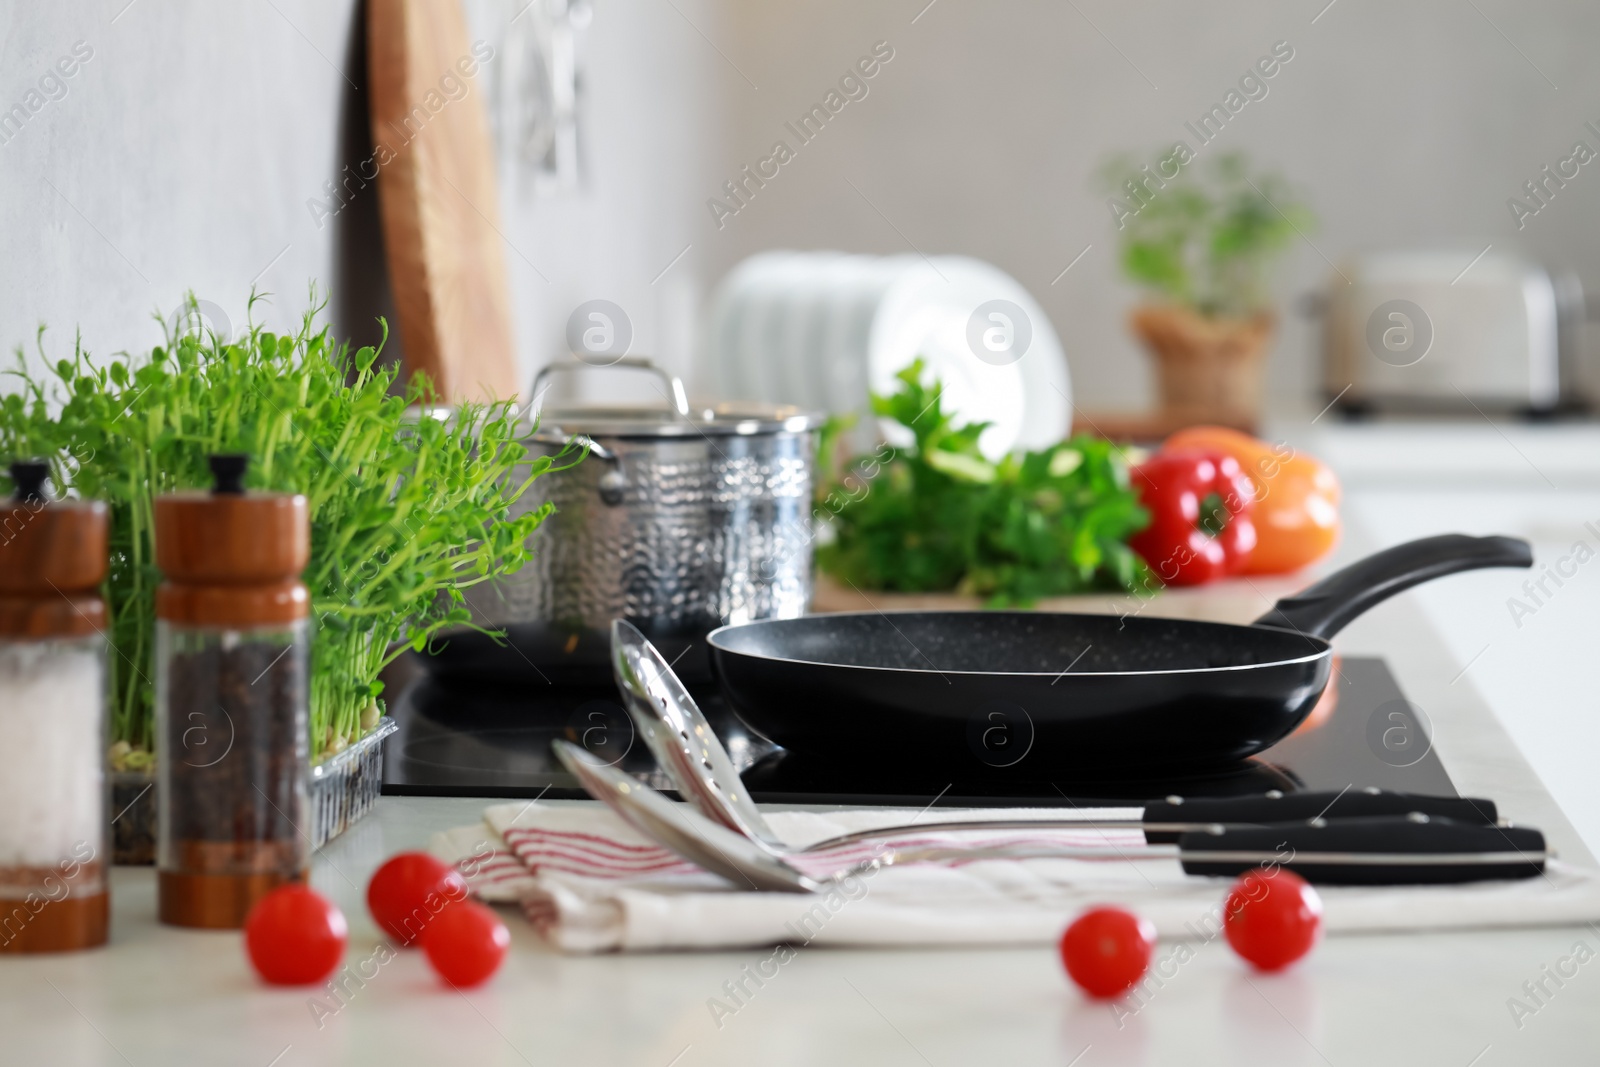 Photo of Countertop with different cooking utensils and vegetables in kitchen